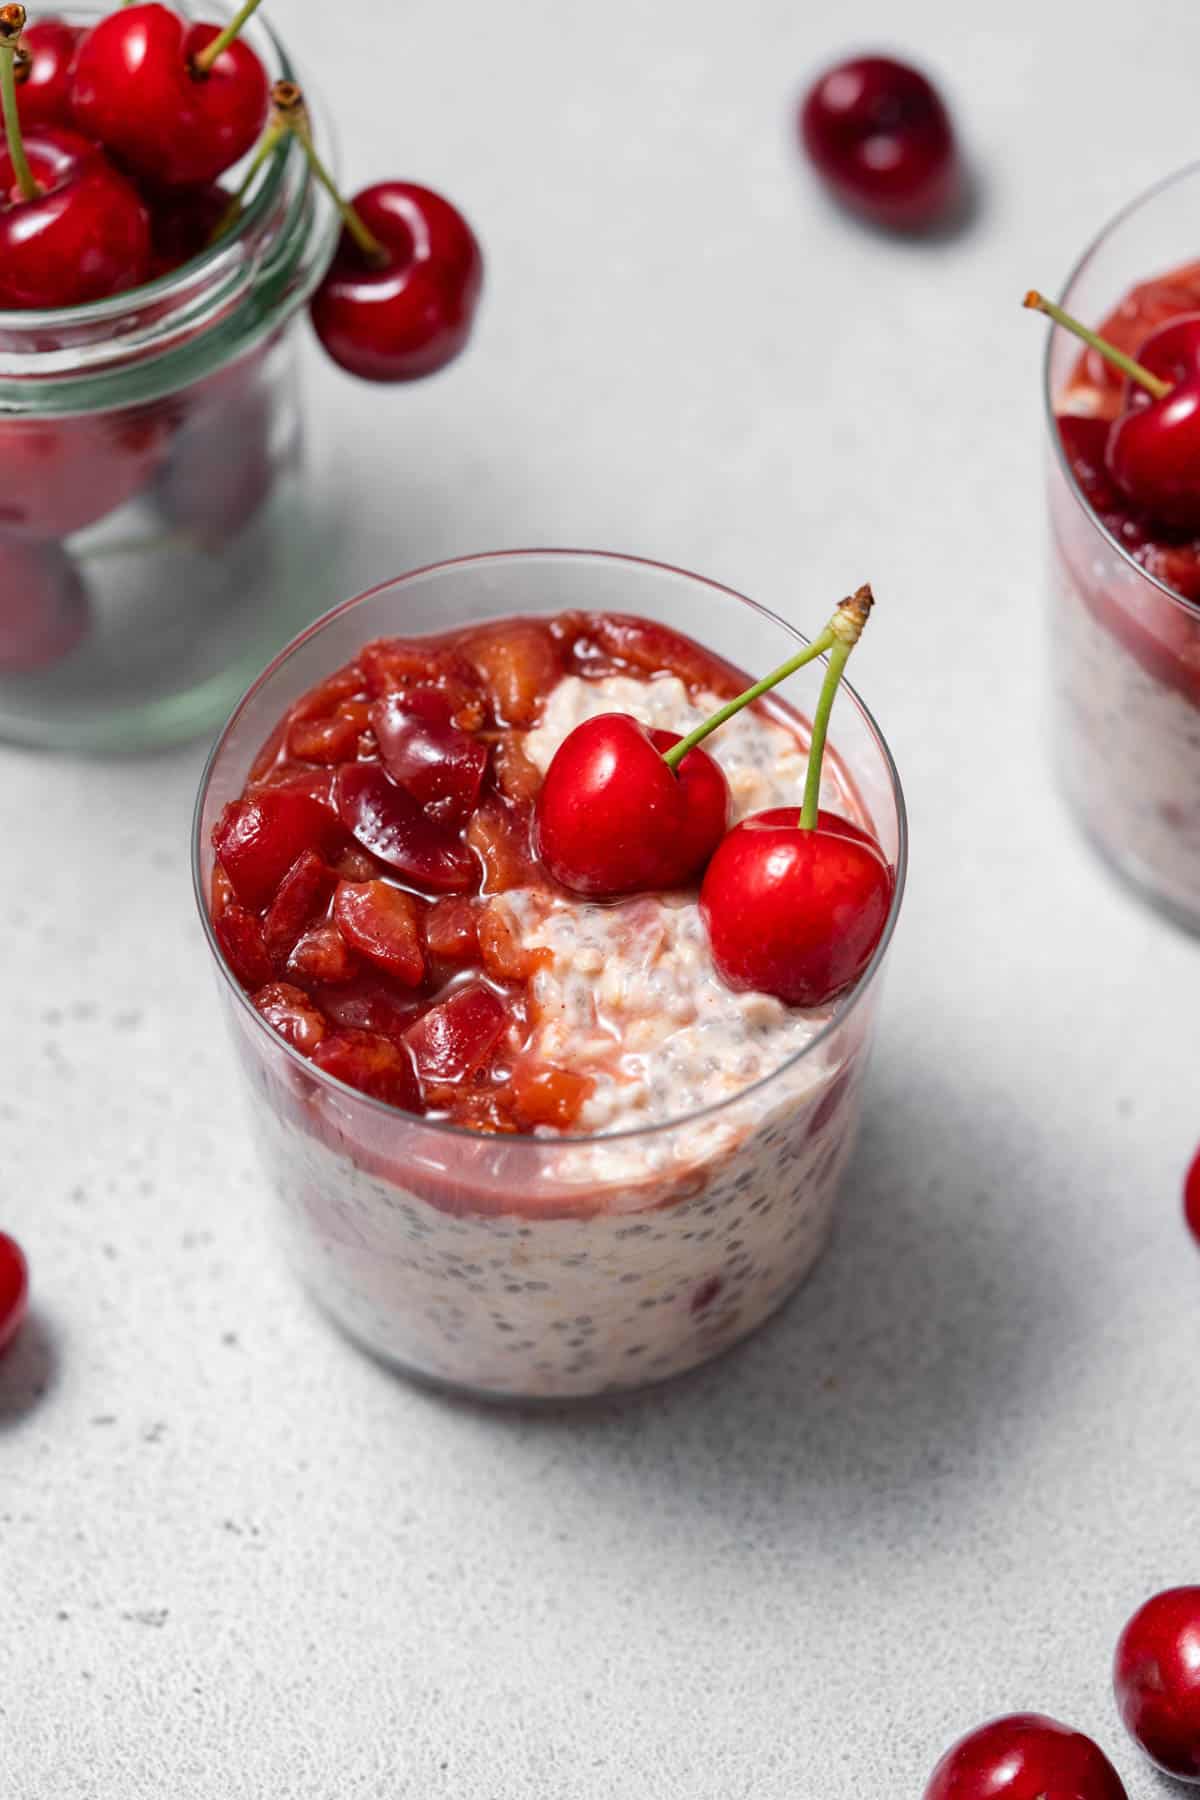 A slightly overhead view of a glass of cherry overnight oats with cherry jam and fresh cherries on top.